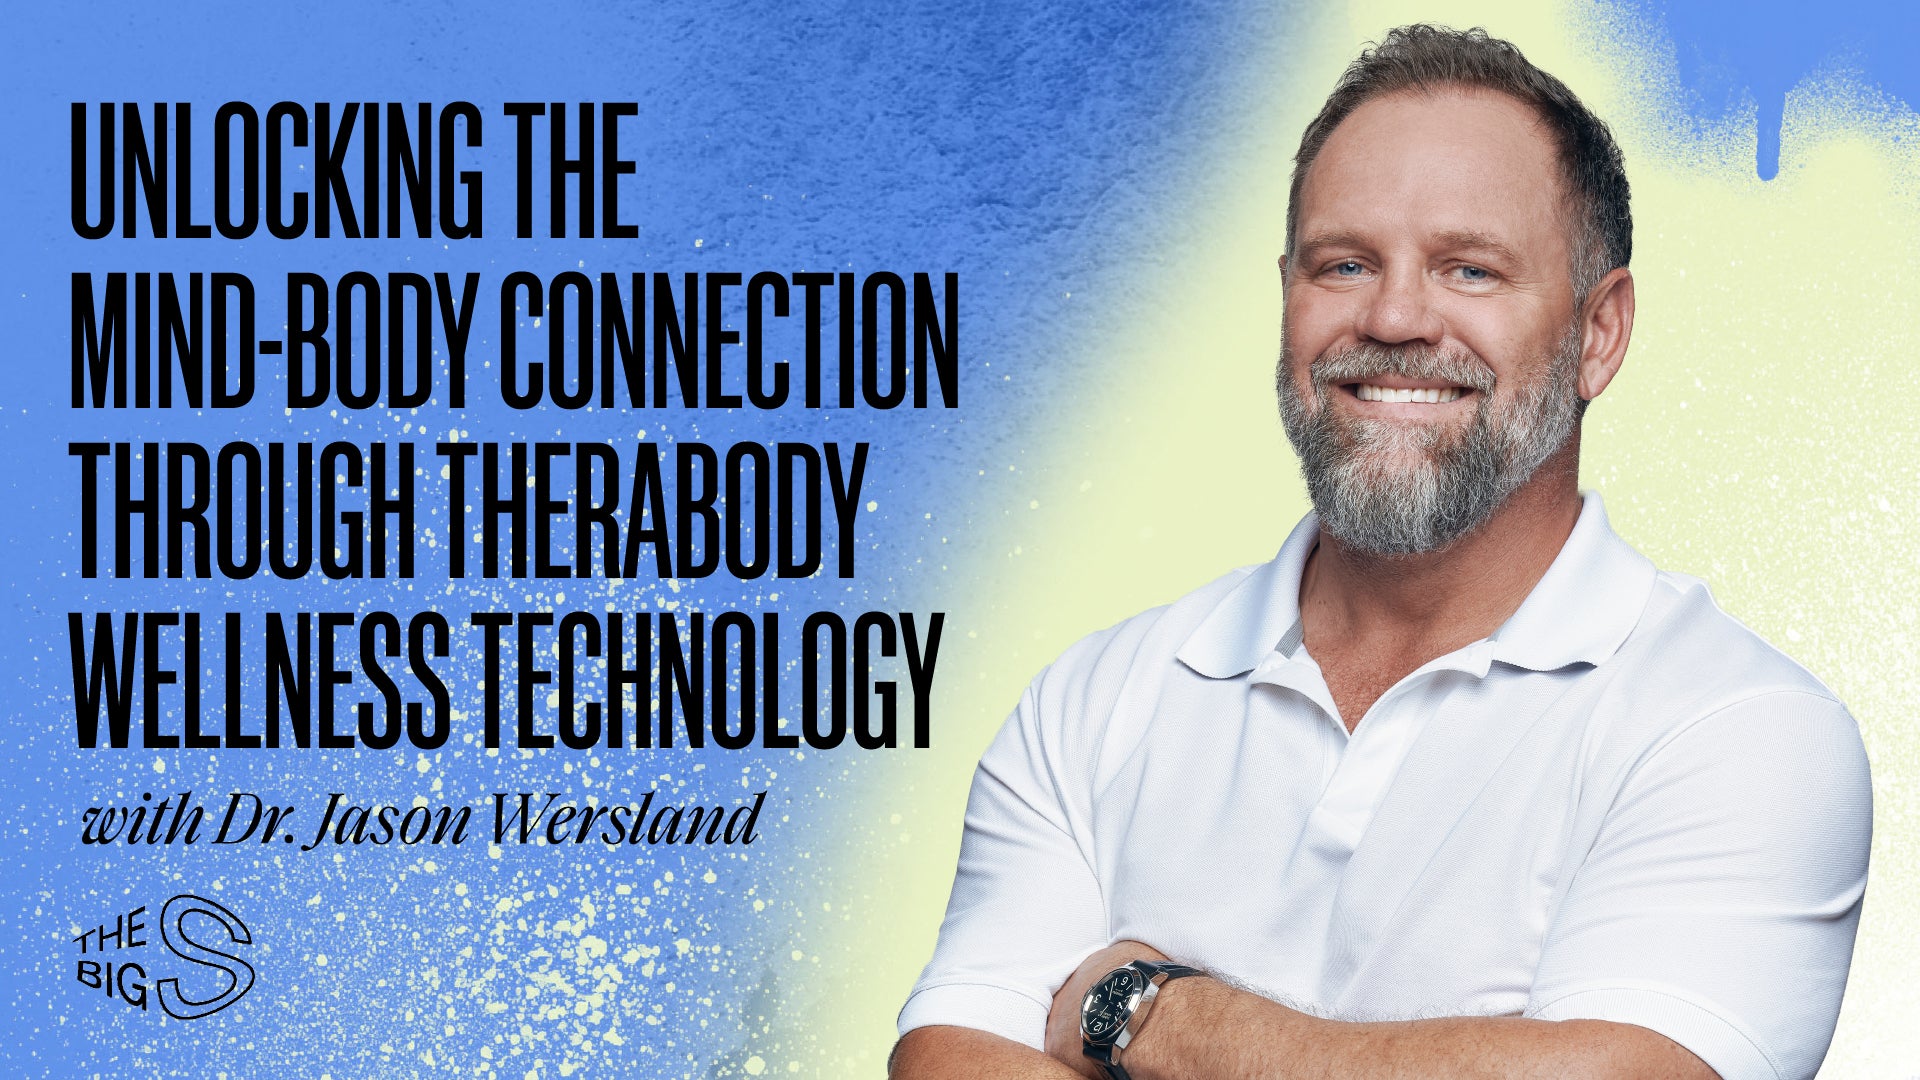 62. Unlocking the Mind-Body Connection Through Therabody Wellness Technology with Dr. Jason Wersland